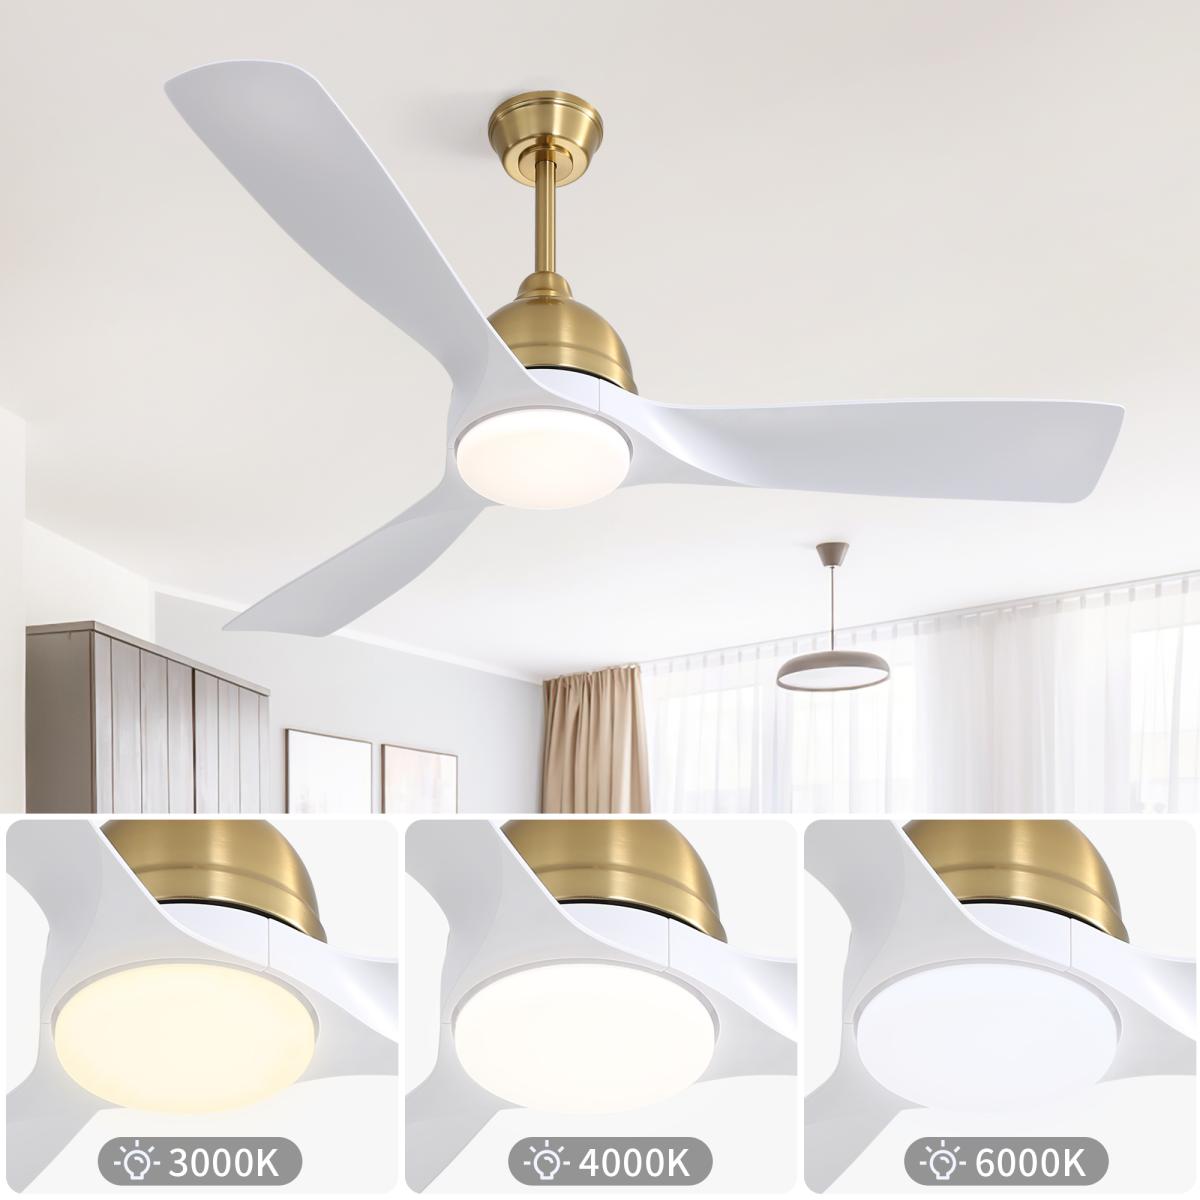 54 Inch Modern Abs Ceiling Fan 6 Speed Remote Control Dimmable Reversible Dc Motor With Light and Smart App Control